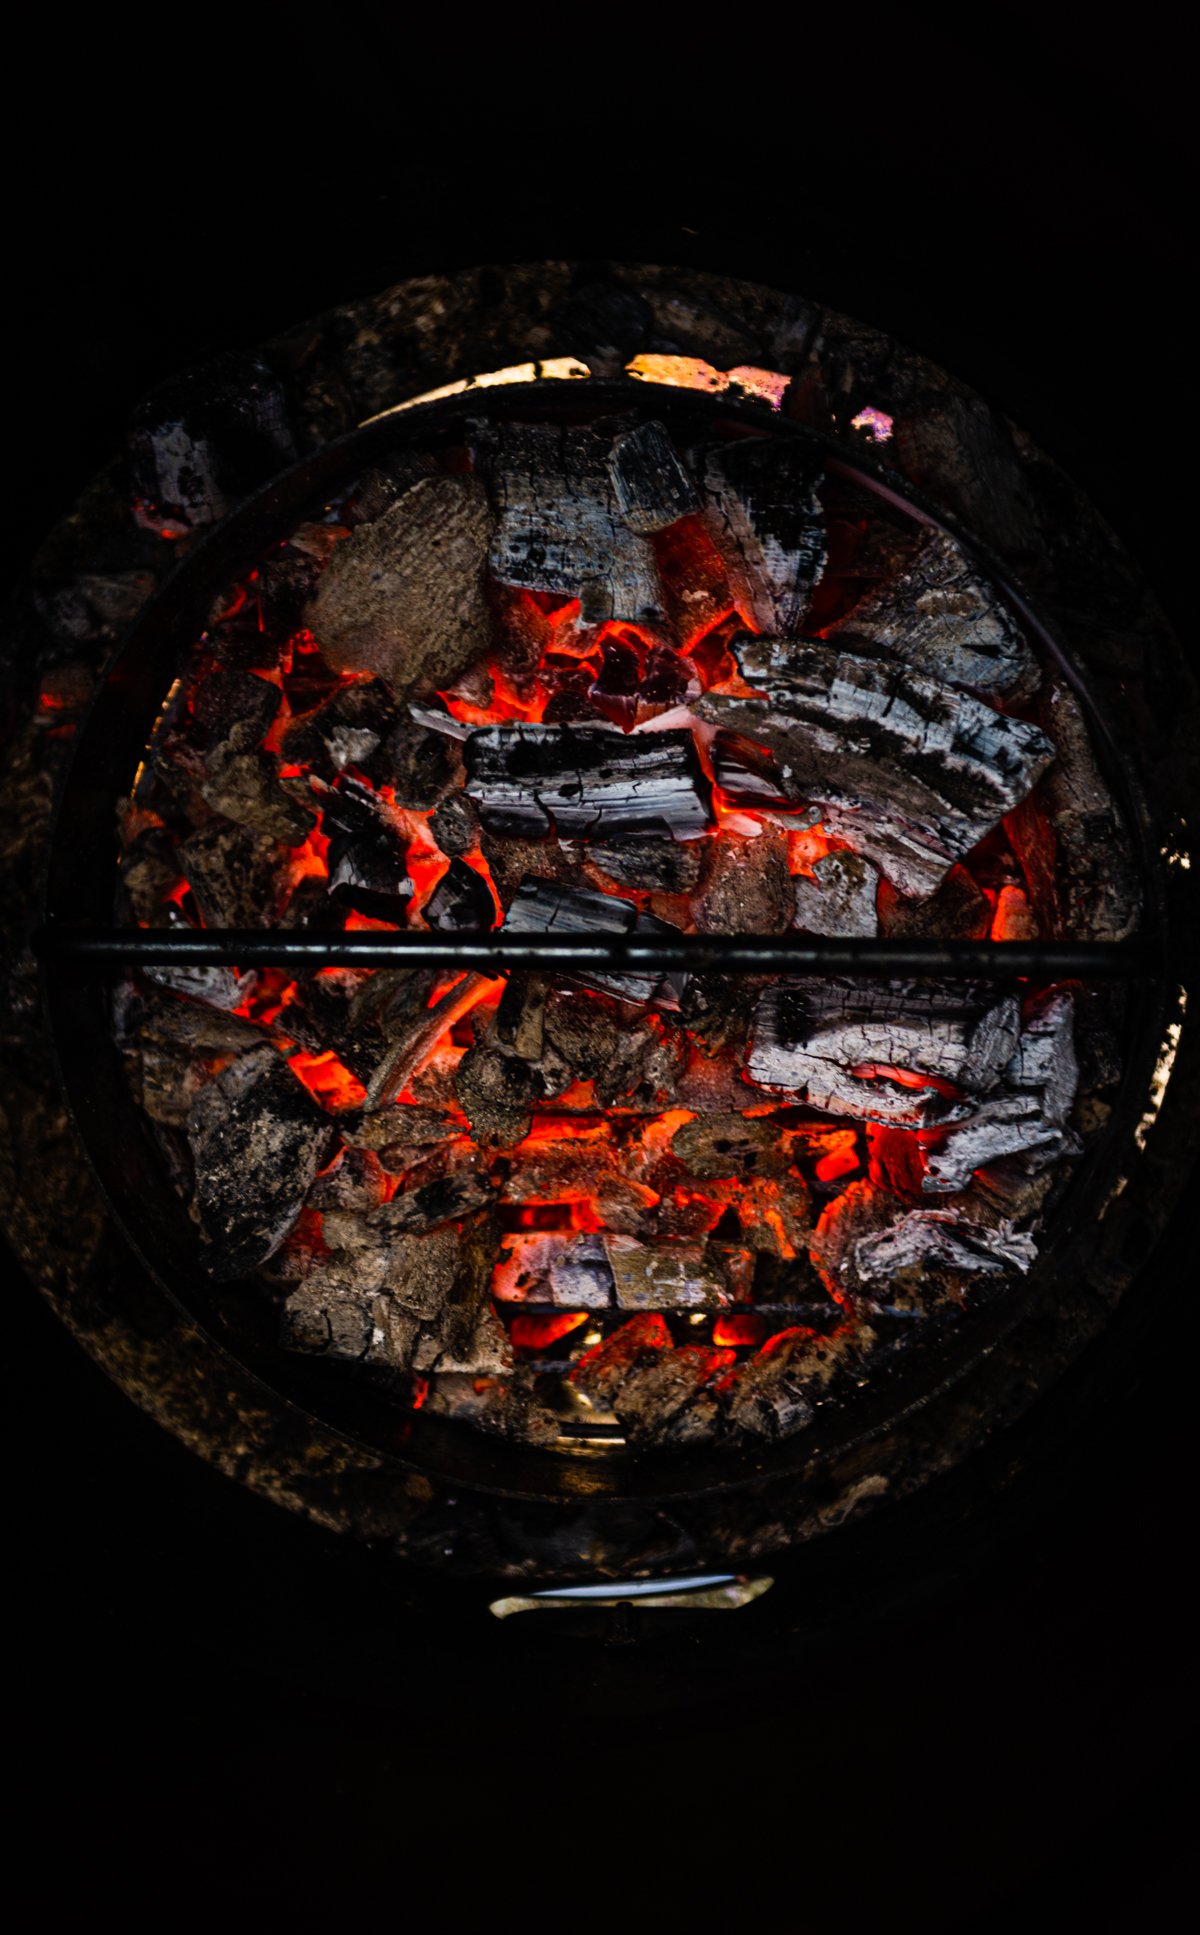 Lump charcoal embers glowing in a grill.